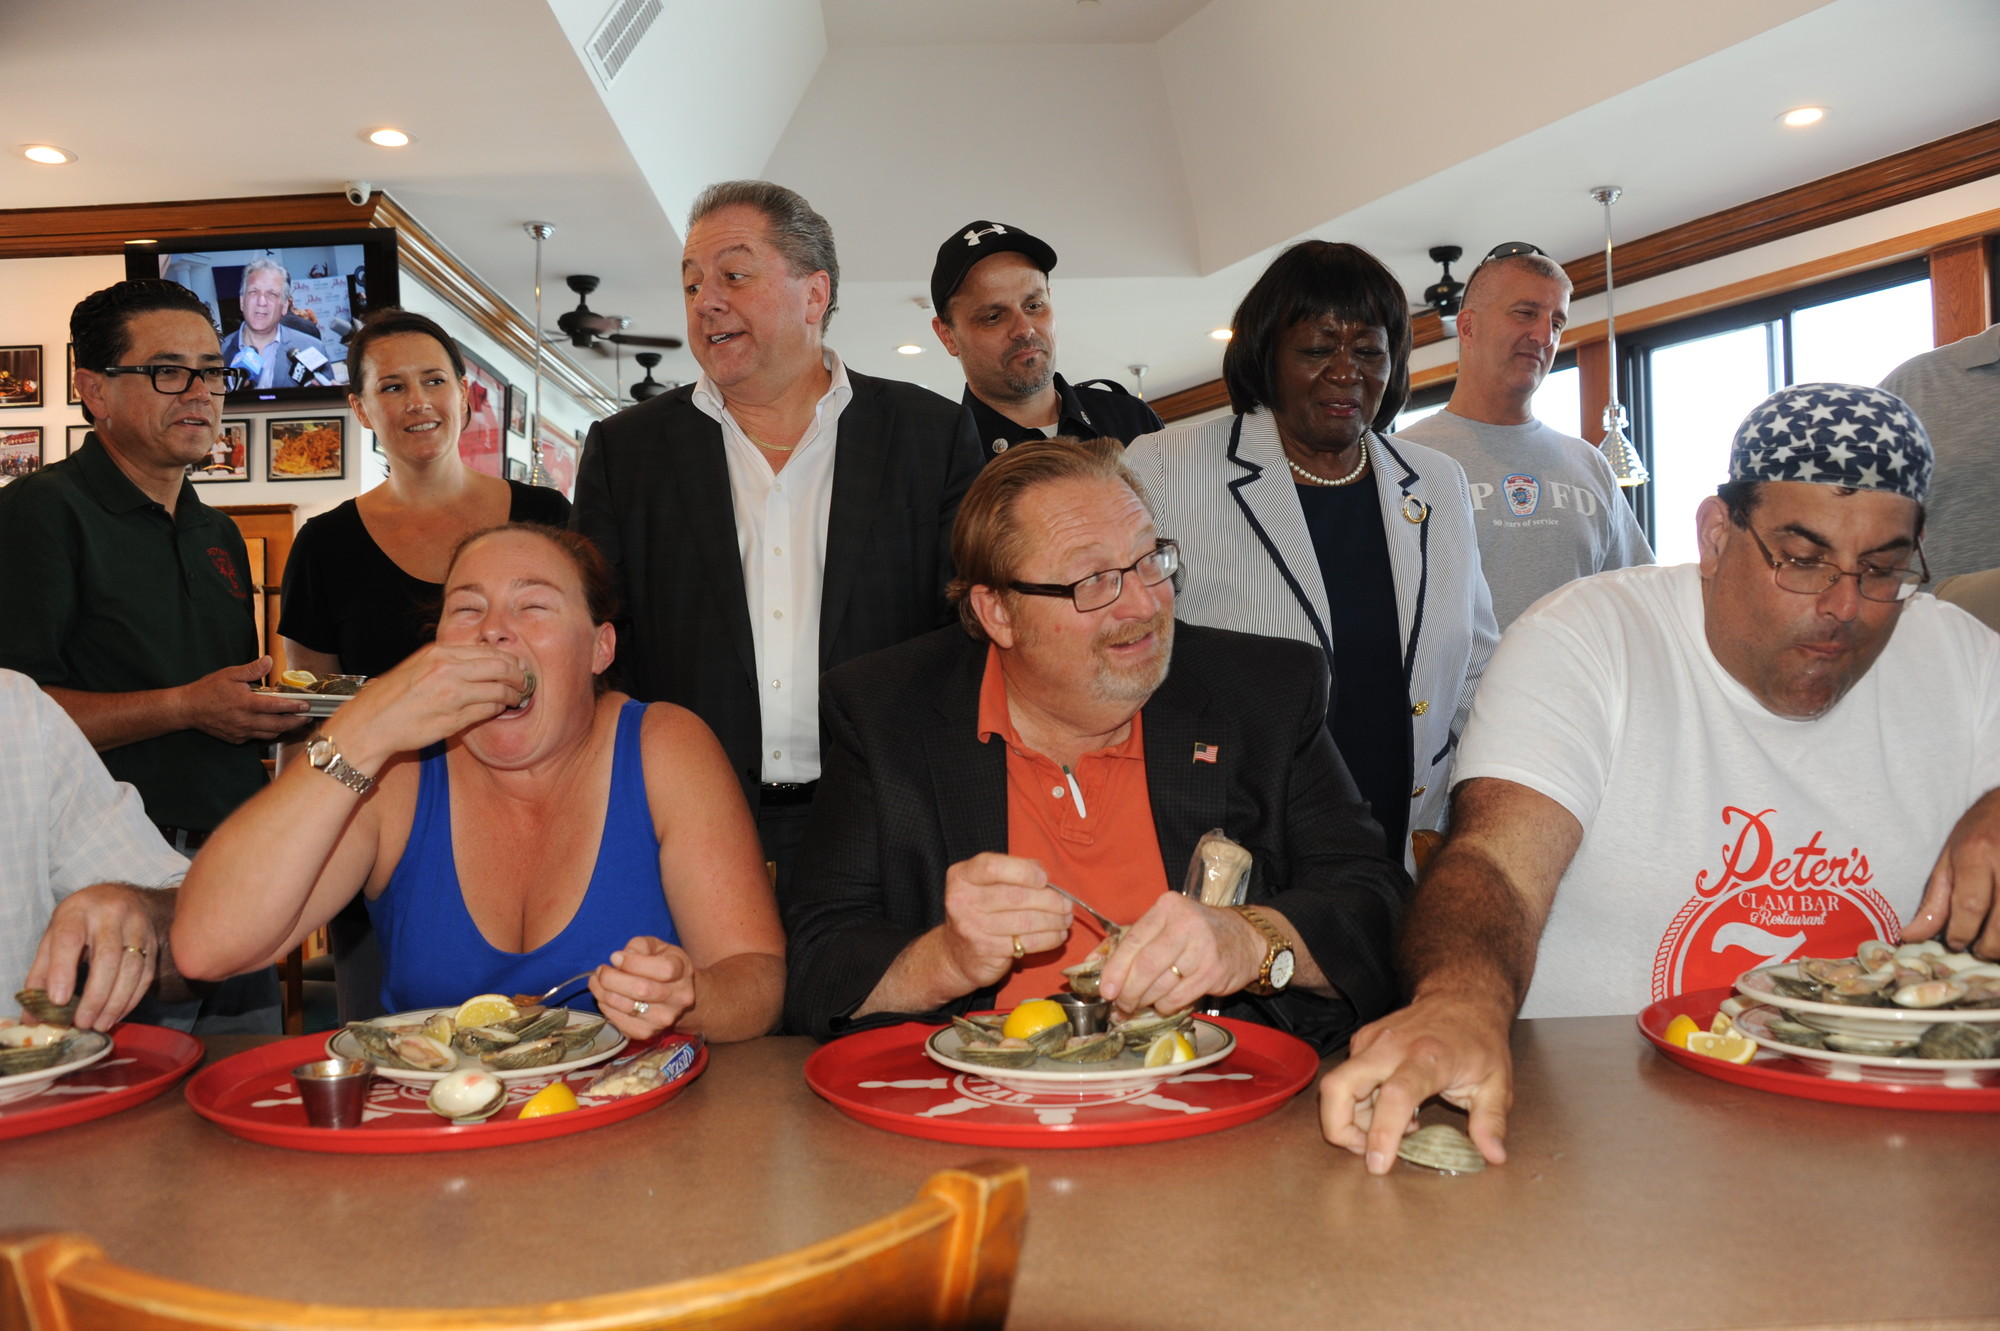 Island Park Mayor Michael McGinty, center, learned the finer points of high-volume clam eating from Ed “Cookie” Jarvis, right, as Peter’s Clam Bar owner Butch Yamali, standing at left, and Hempstead Town Councilwoman Dorothy Goosby, second from right, watched. Jarvis ate 36 clams in 60 seconds. (Penny Frondelli/Herald)